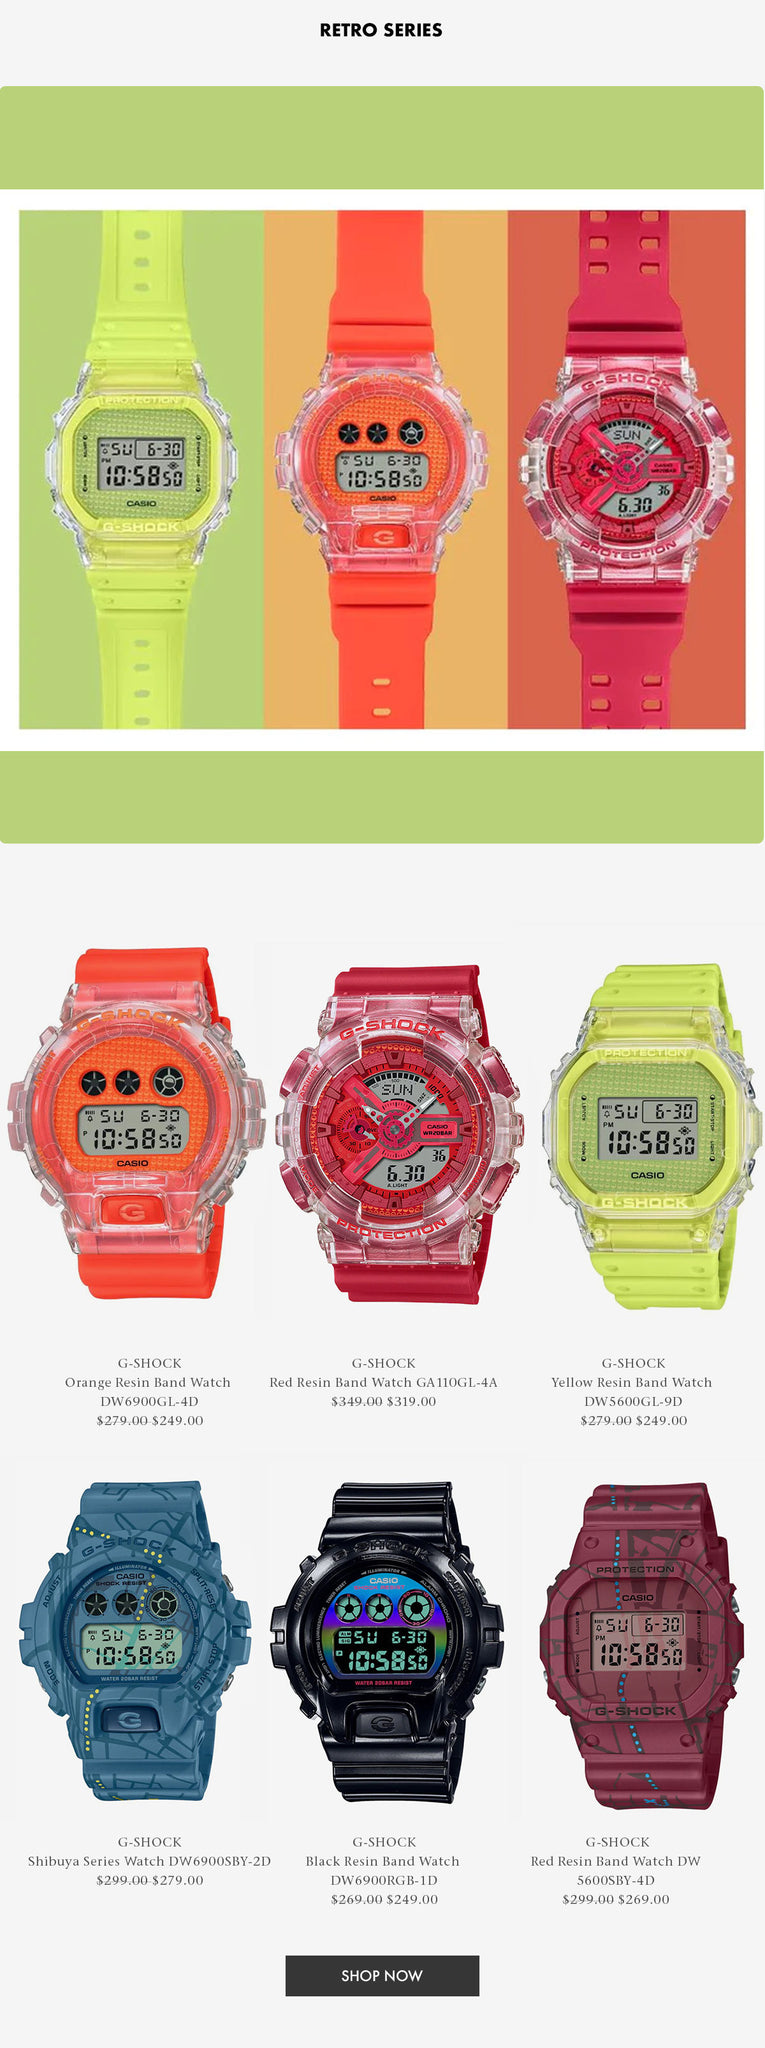 Shop Retro Series from G-Shock